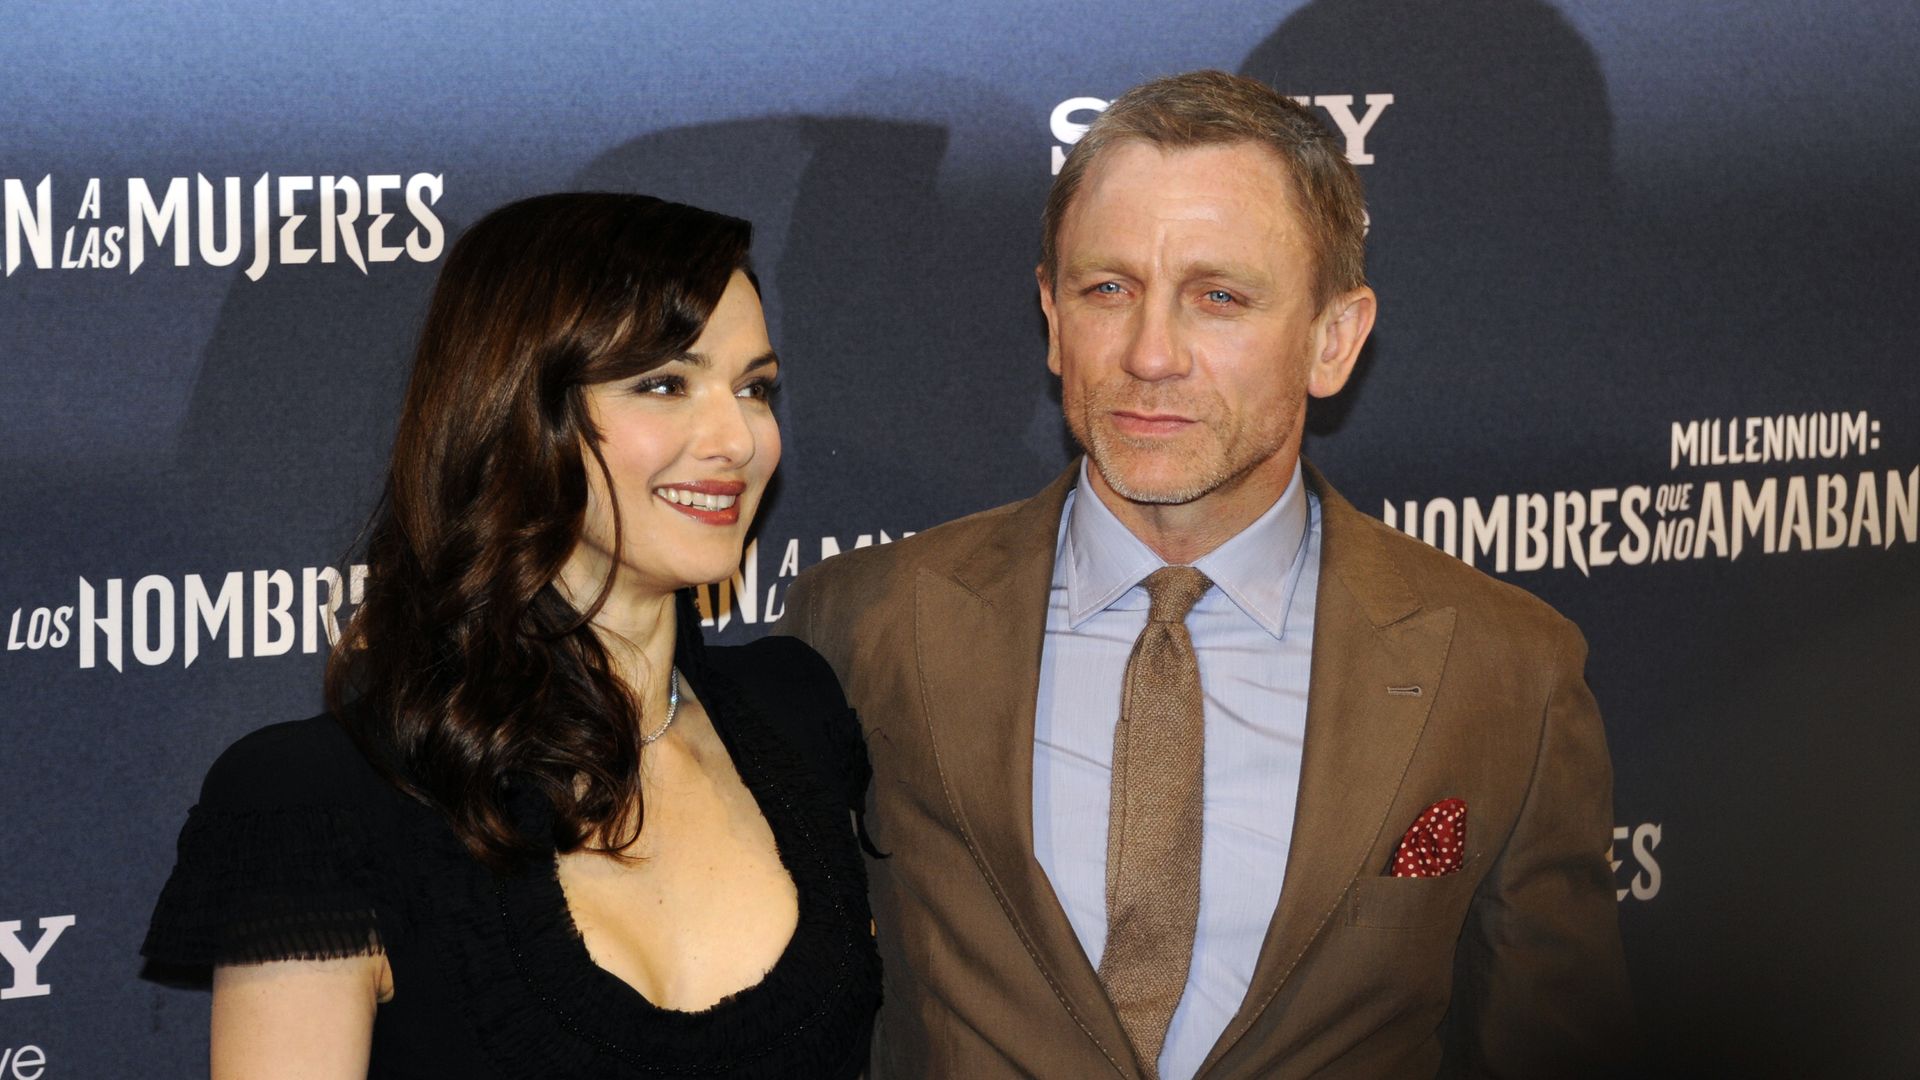 Rachel Weisz and Daniel Craig at the premiere of The Girl with the Dragon Tattoo in 2011